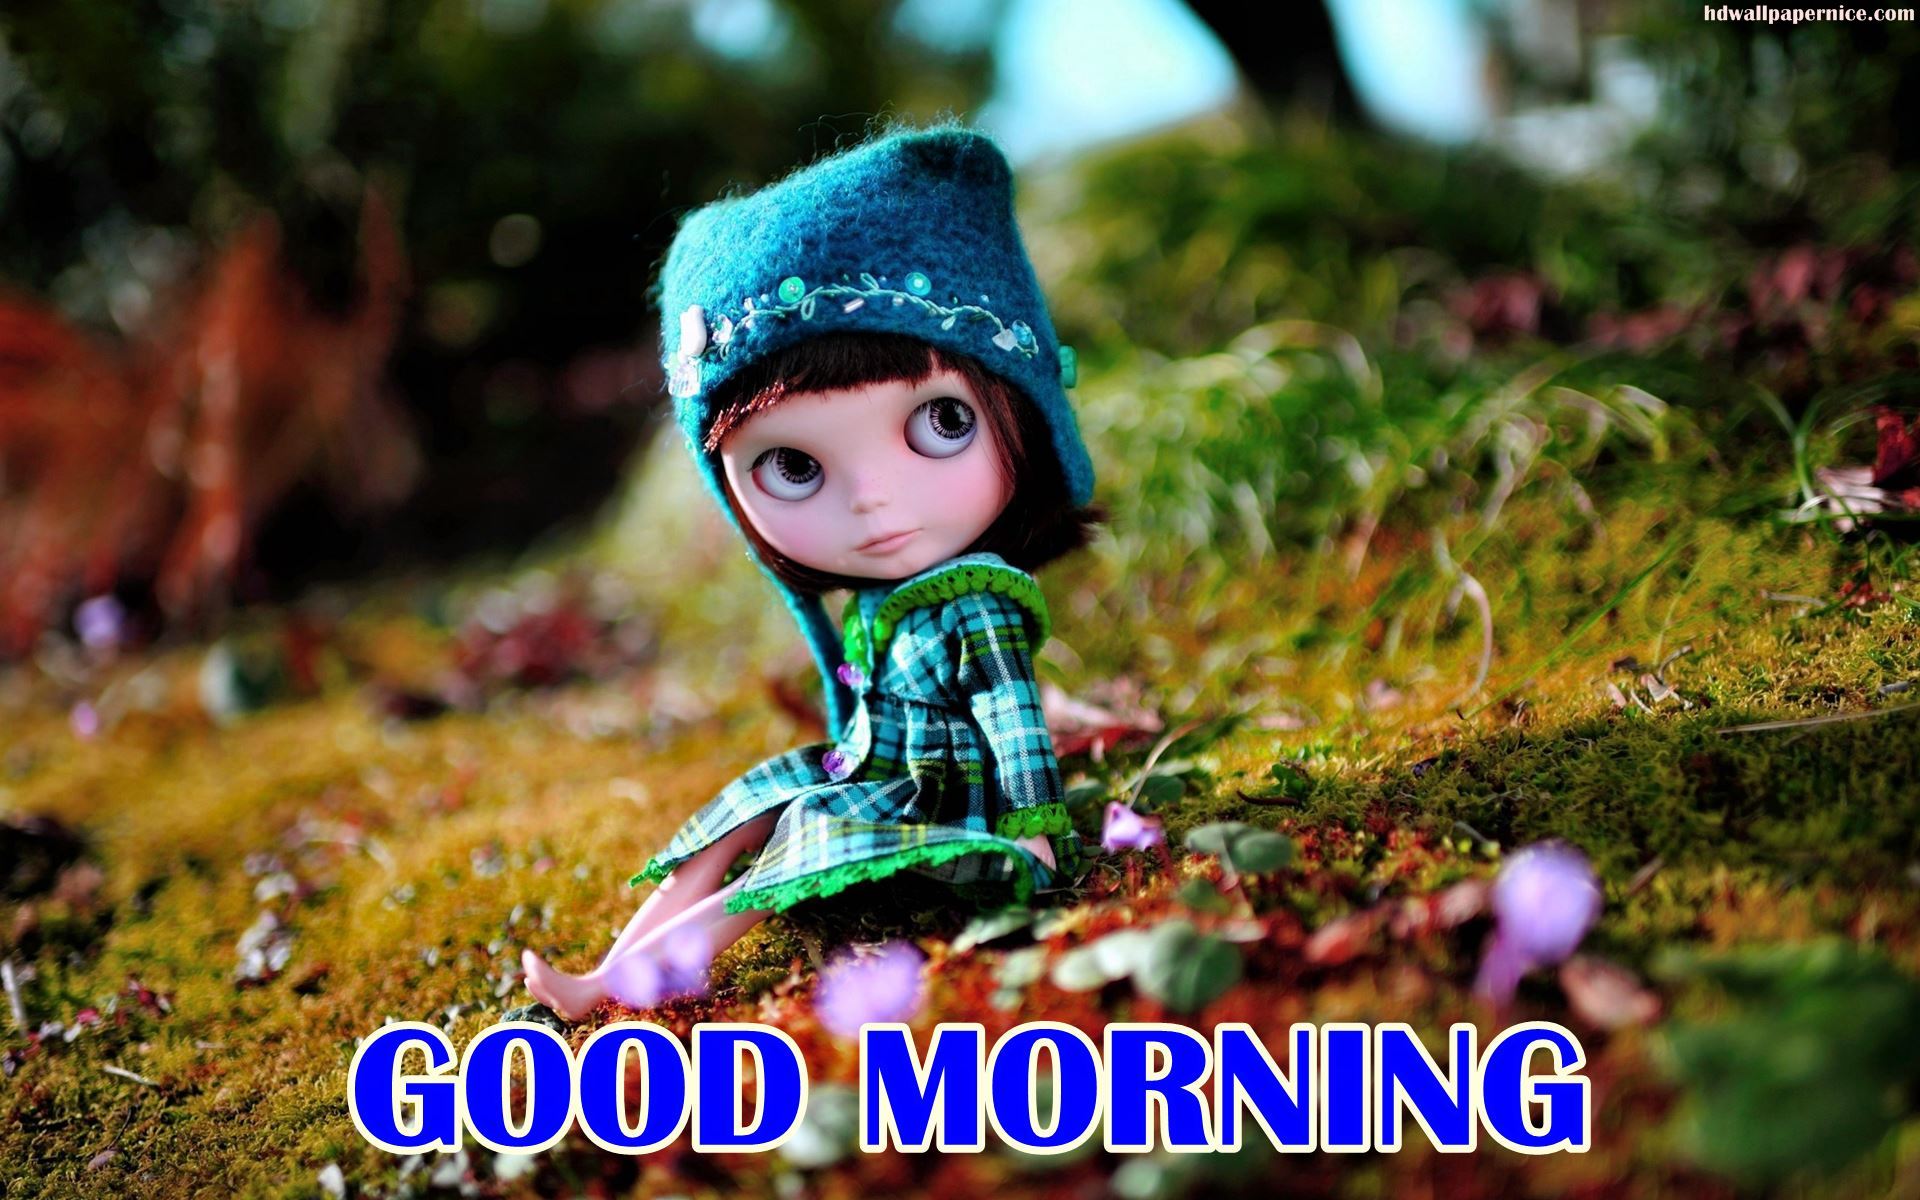 Good Morning With Doll - Good Morning Images With Doll , HD Wallpaper & Backgrounds